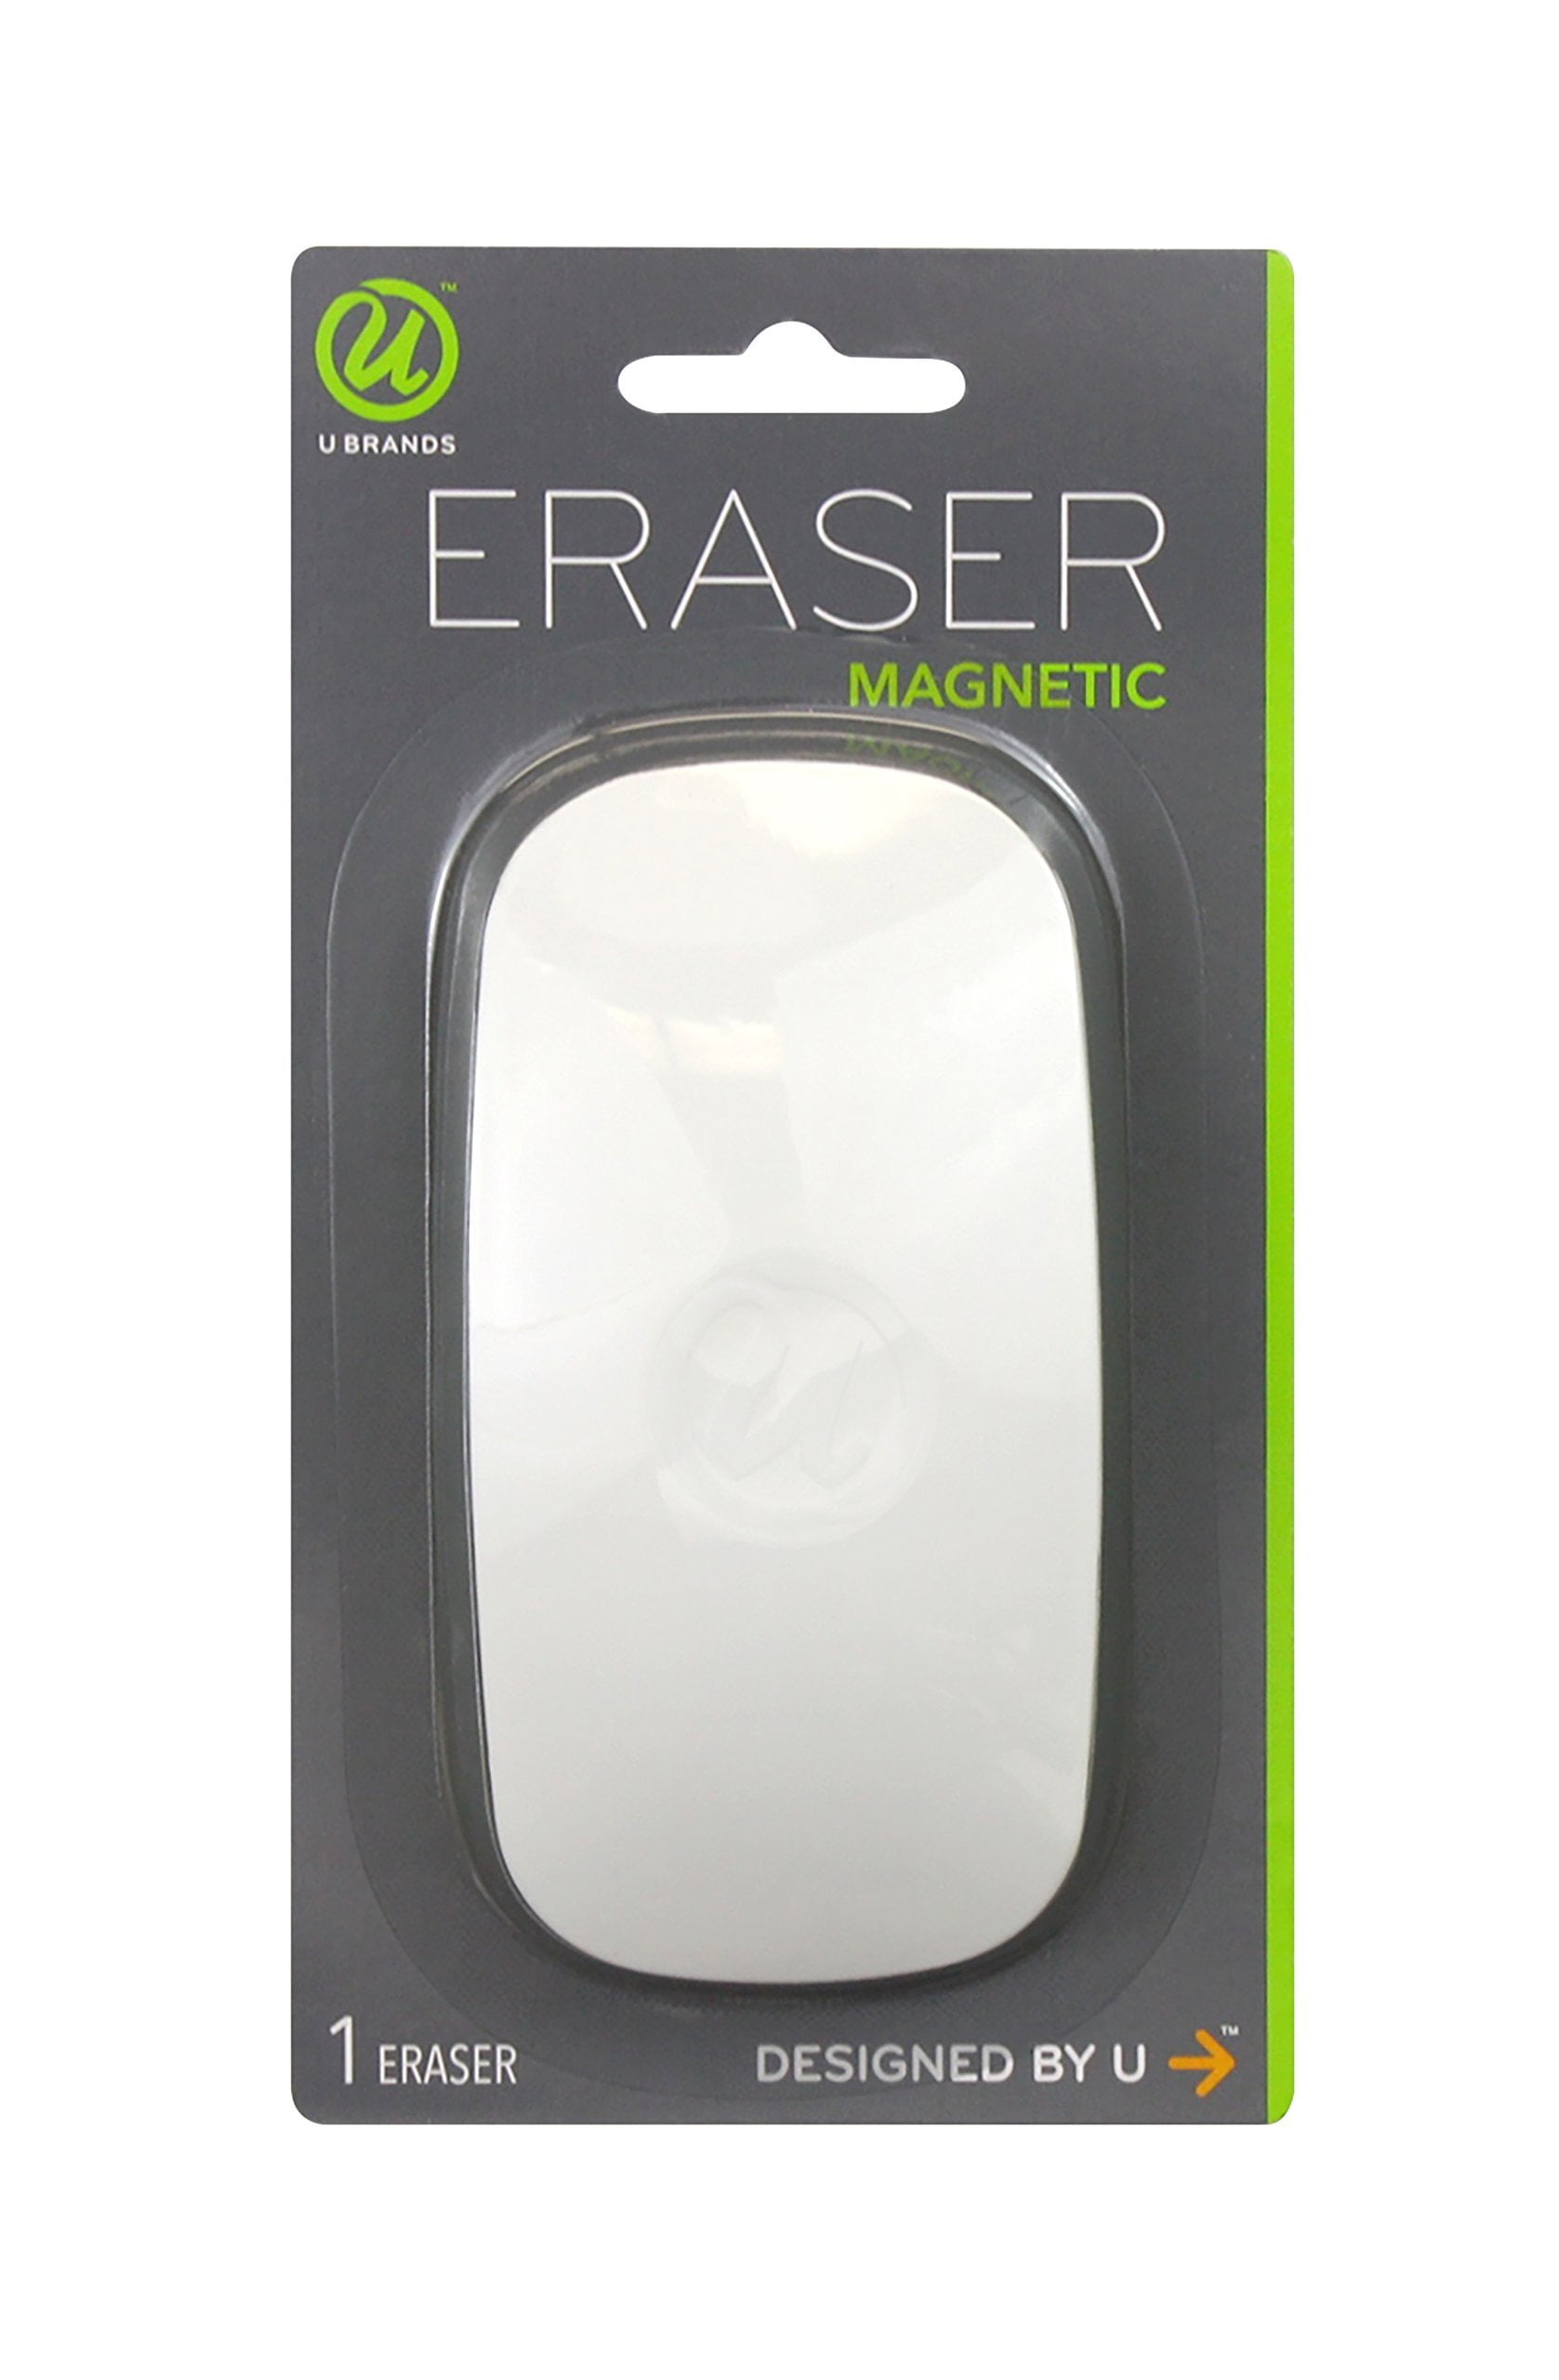 Magnetic Dry Erase Board Eraser 4.5 x 2.25 x 1 Inches Felt Bottom Surface 